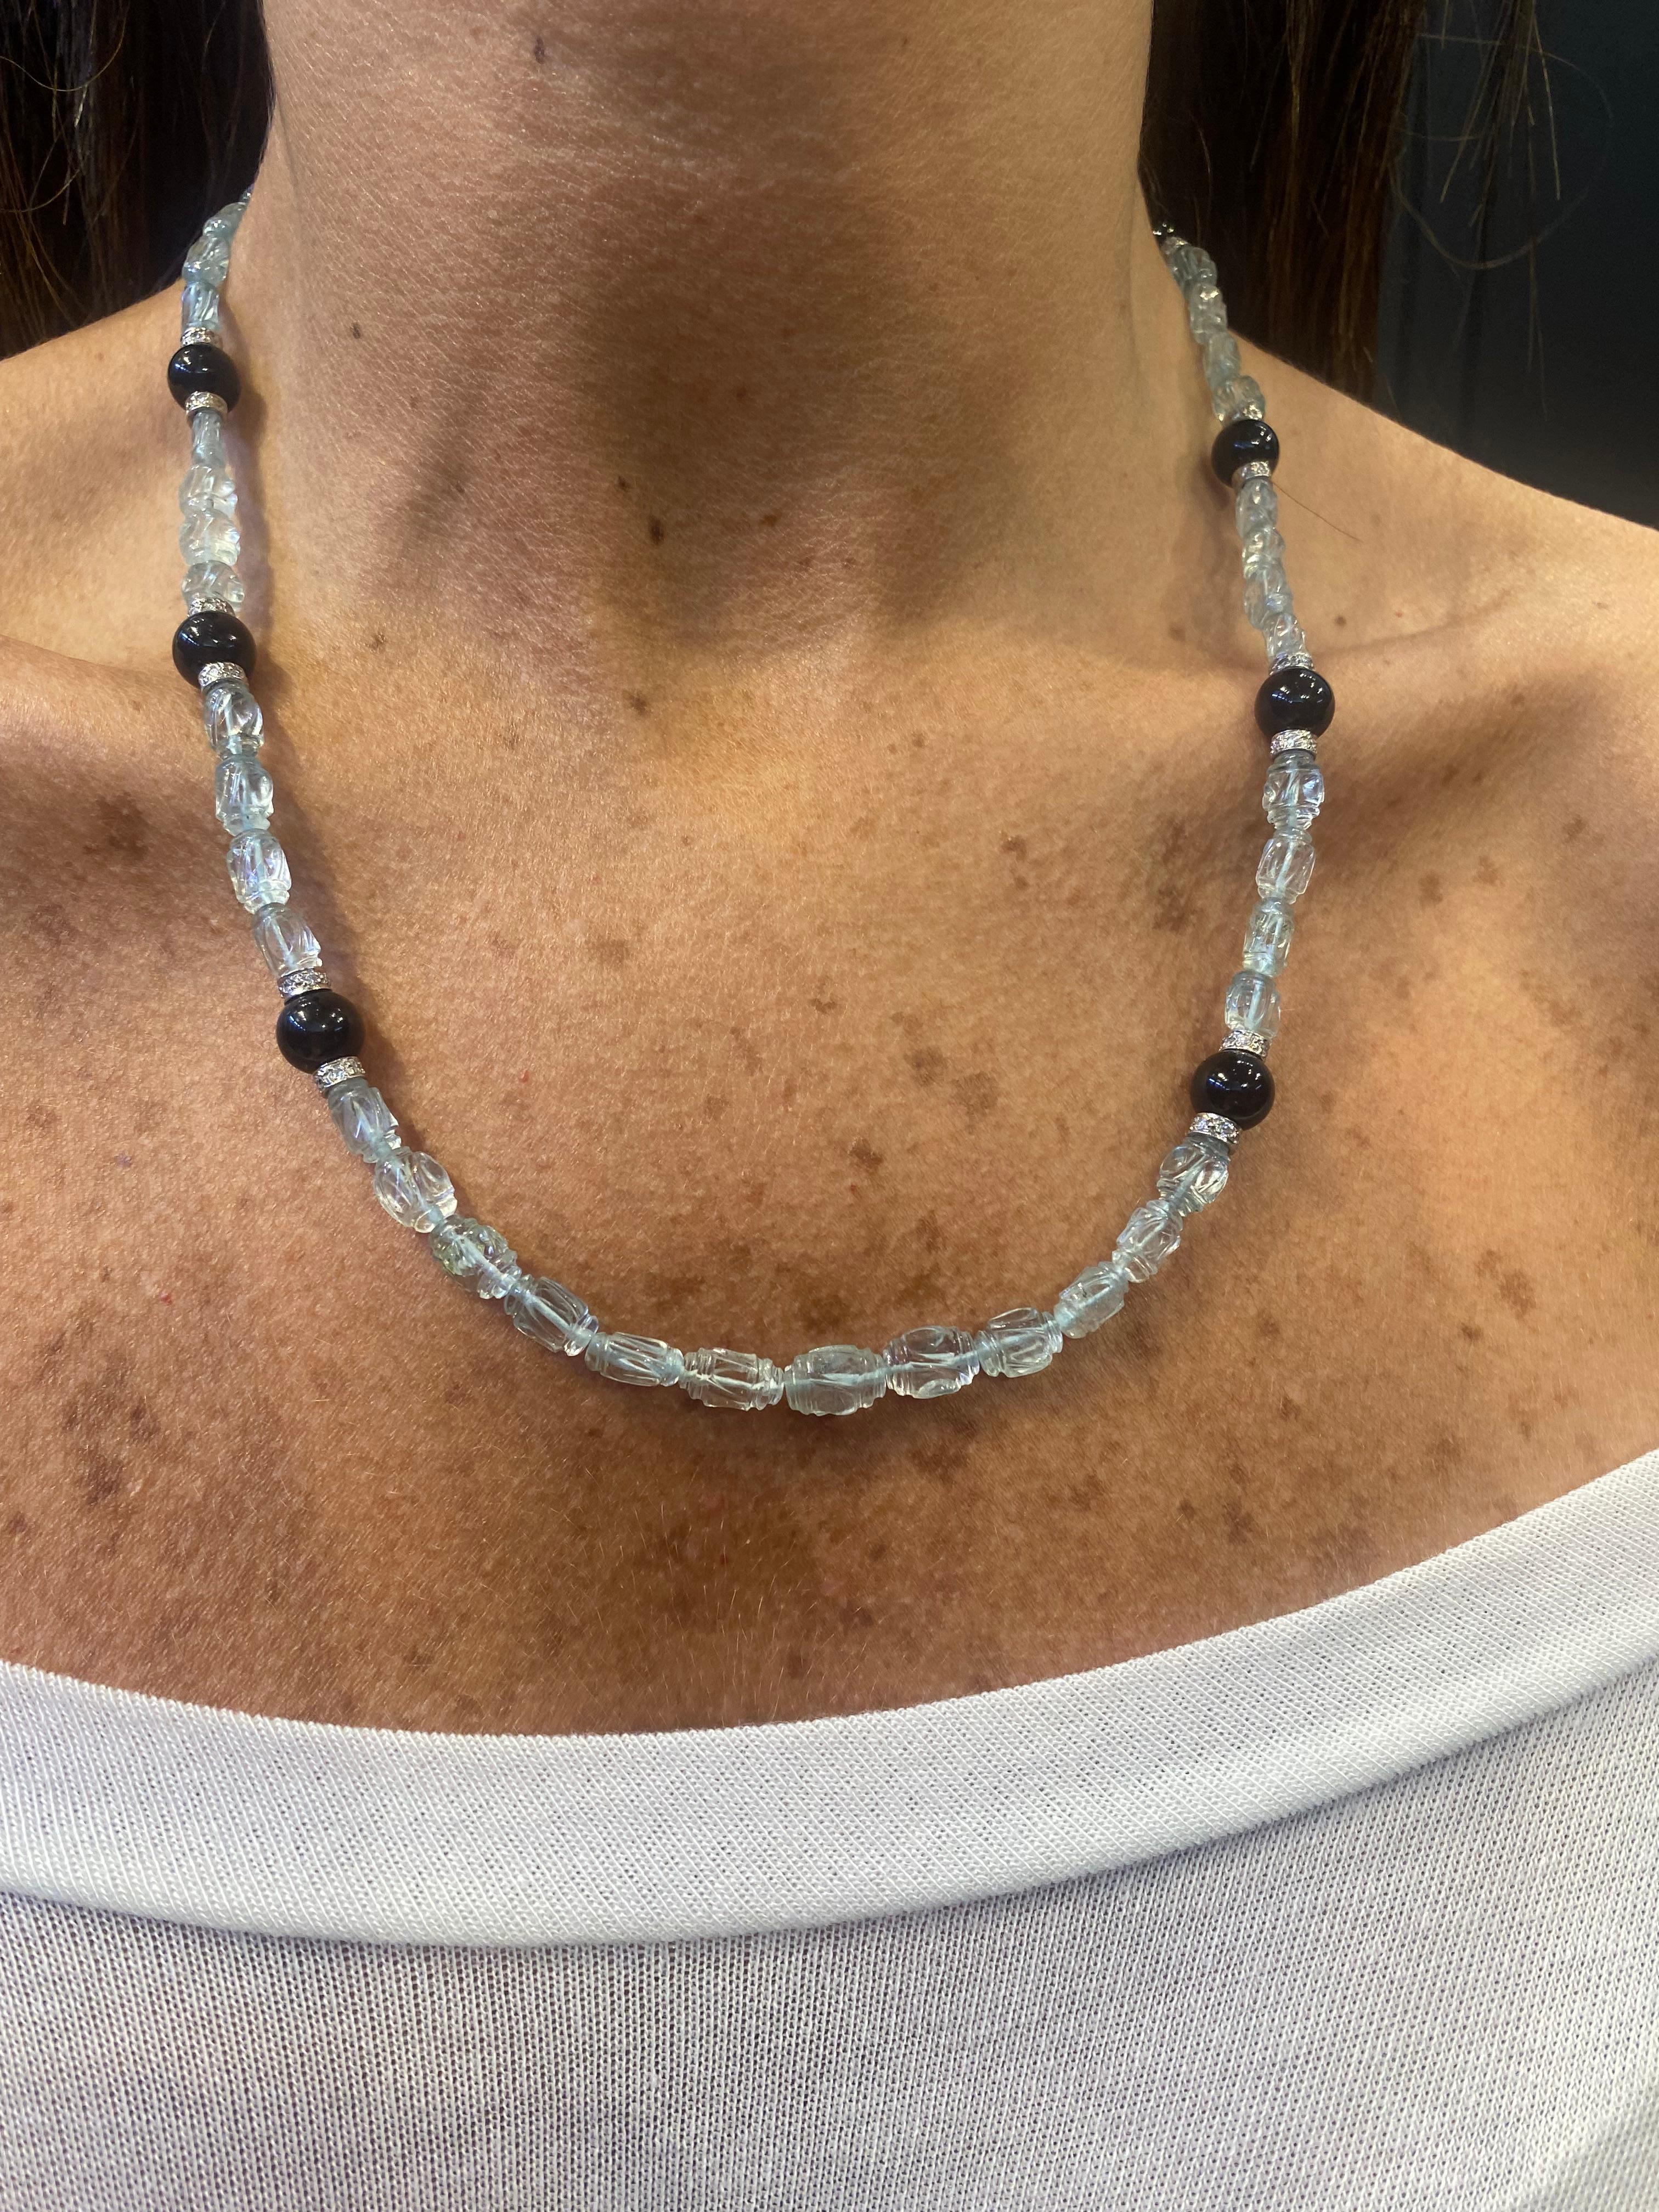 Carved Aquamarine & Onyx Bead Necklace  In Excellent Condition For Sale In New York, NY